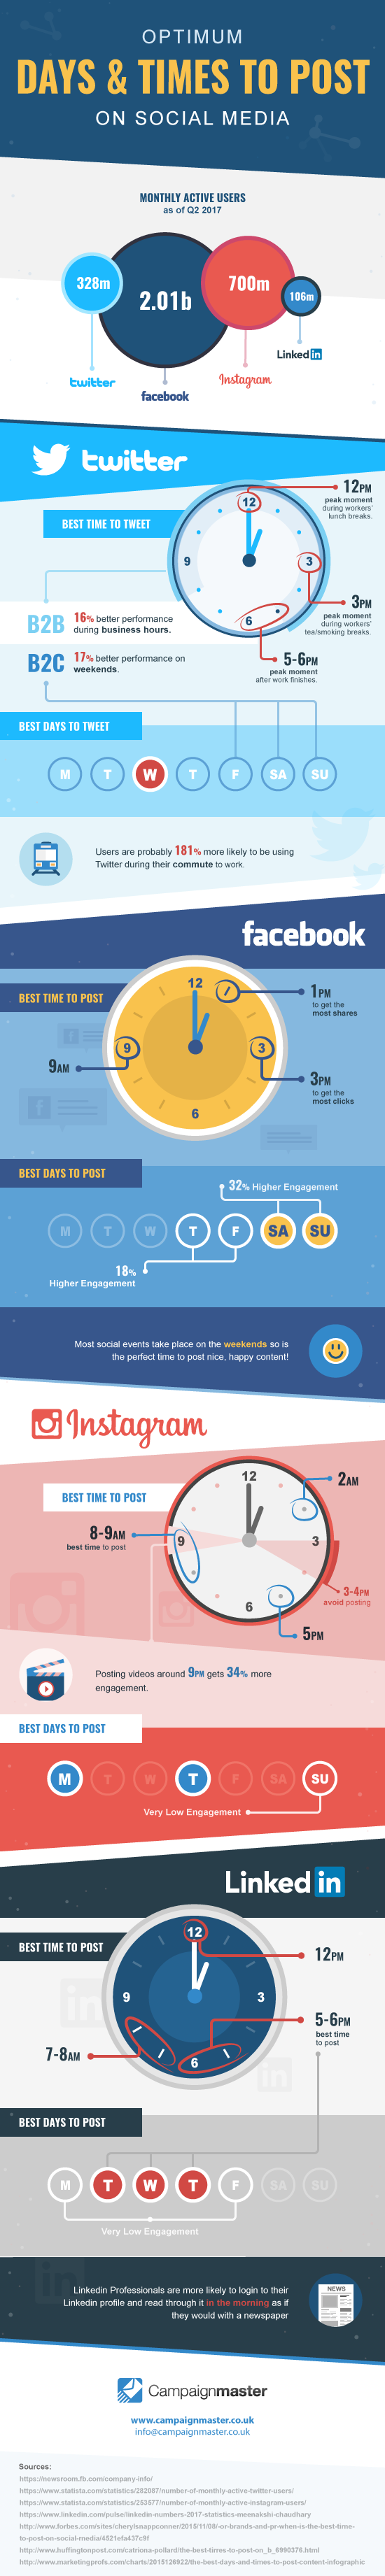 Optimum times to post on social media infographic